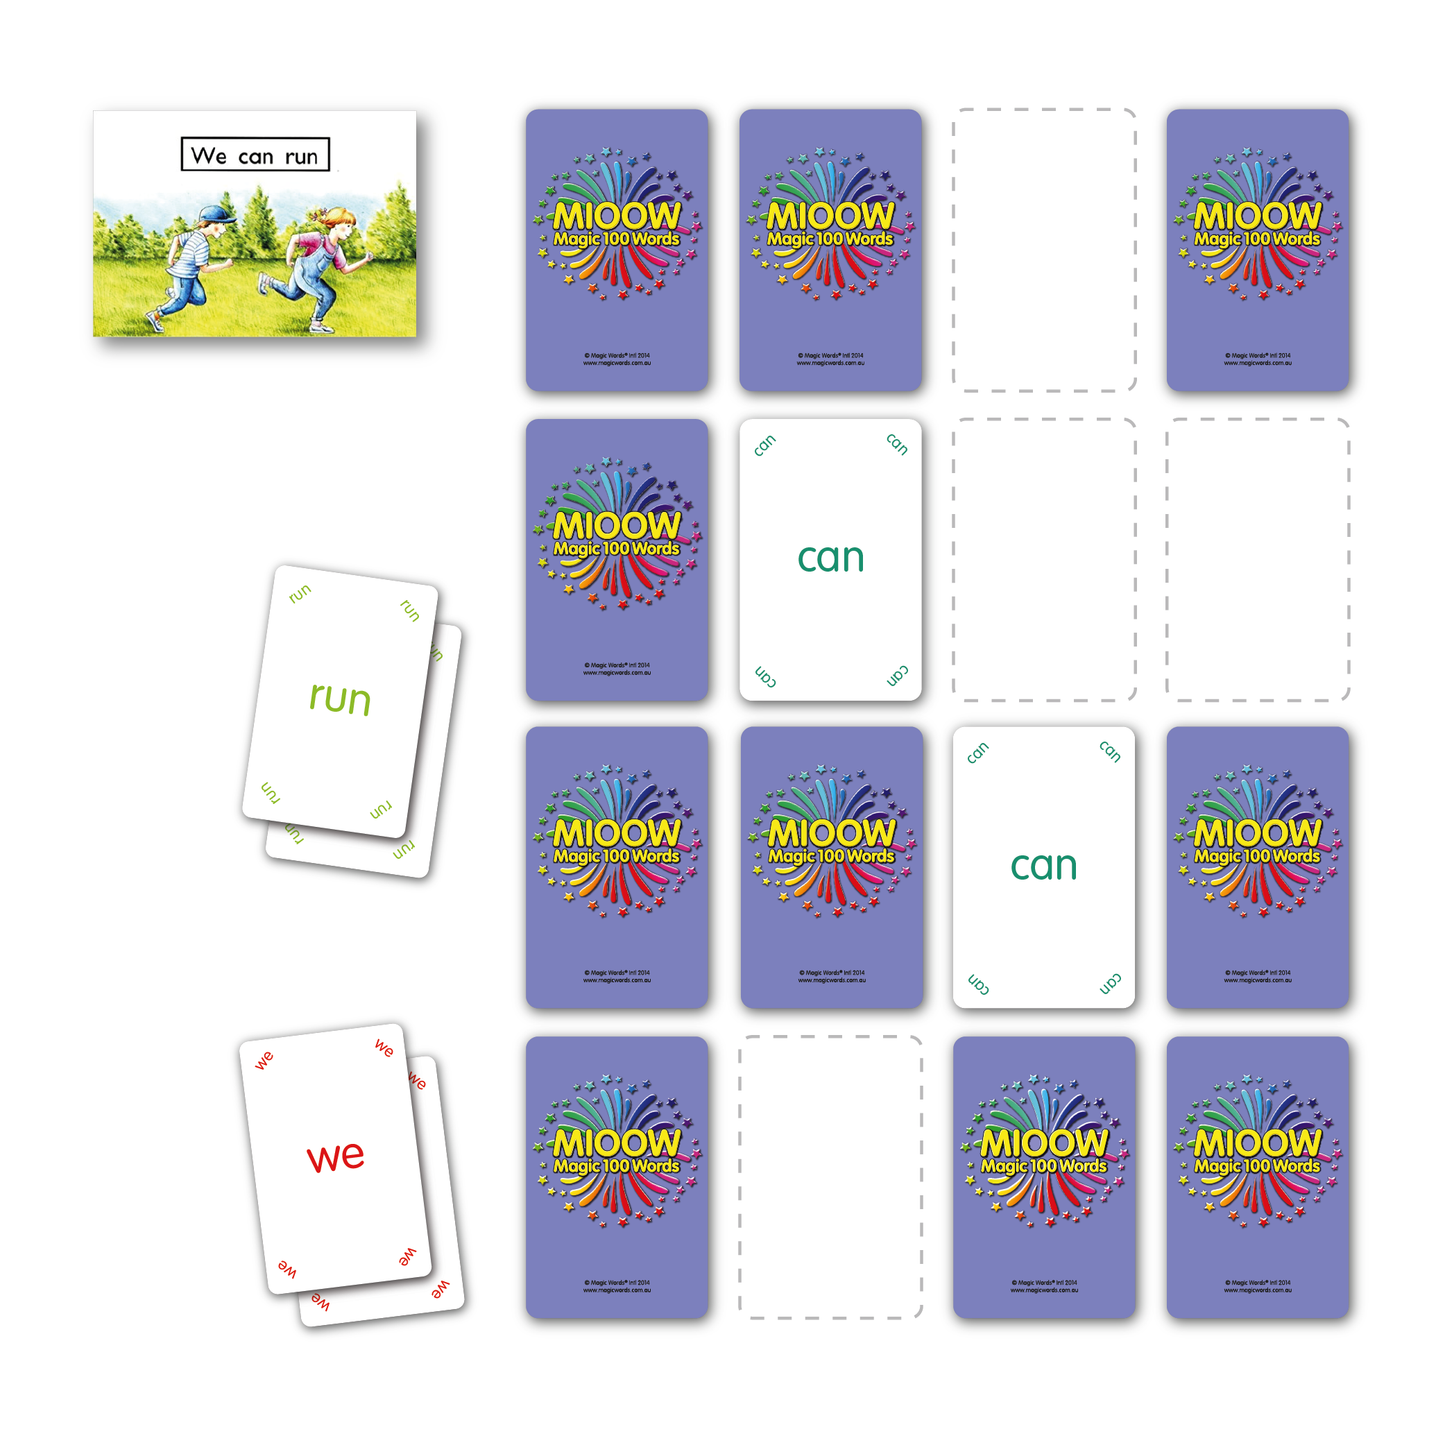 These Magic Words sight words are the most frequently used words in reading. This set of Magic 100 Words contains the 1 -100 most frequent words as a set of flashcards (x2 per word for pairing games) and the Magic 100 Learning Boards - Golden Words, Red Words, Blue Words, Green Words, Orange Words, Indigo Words and Violet Words. Featuring story book we can run